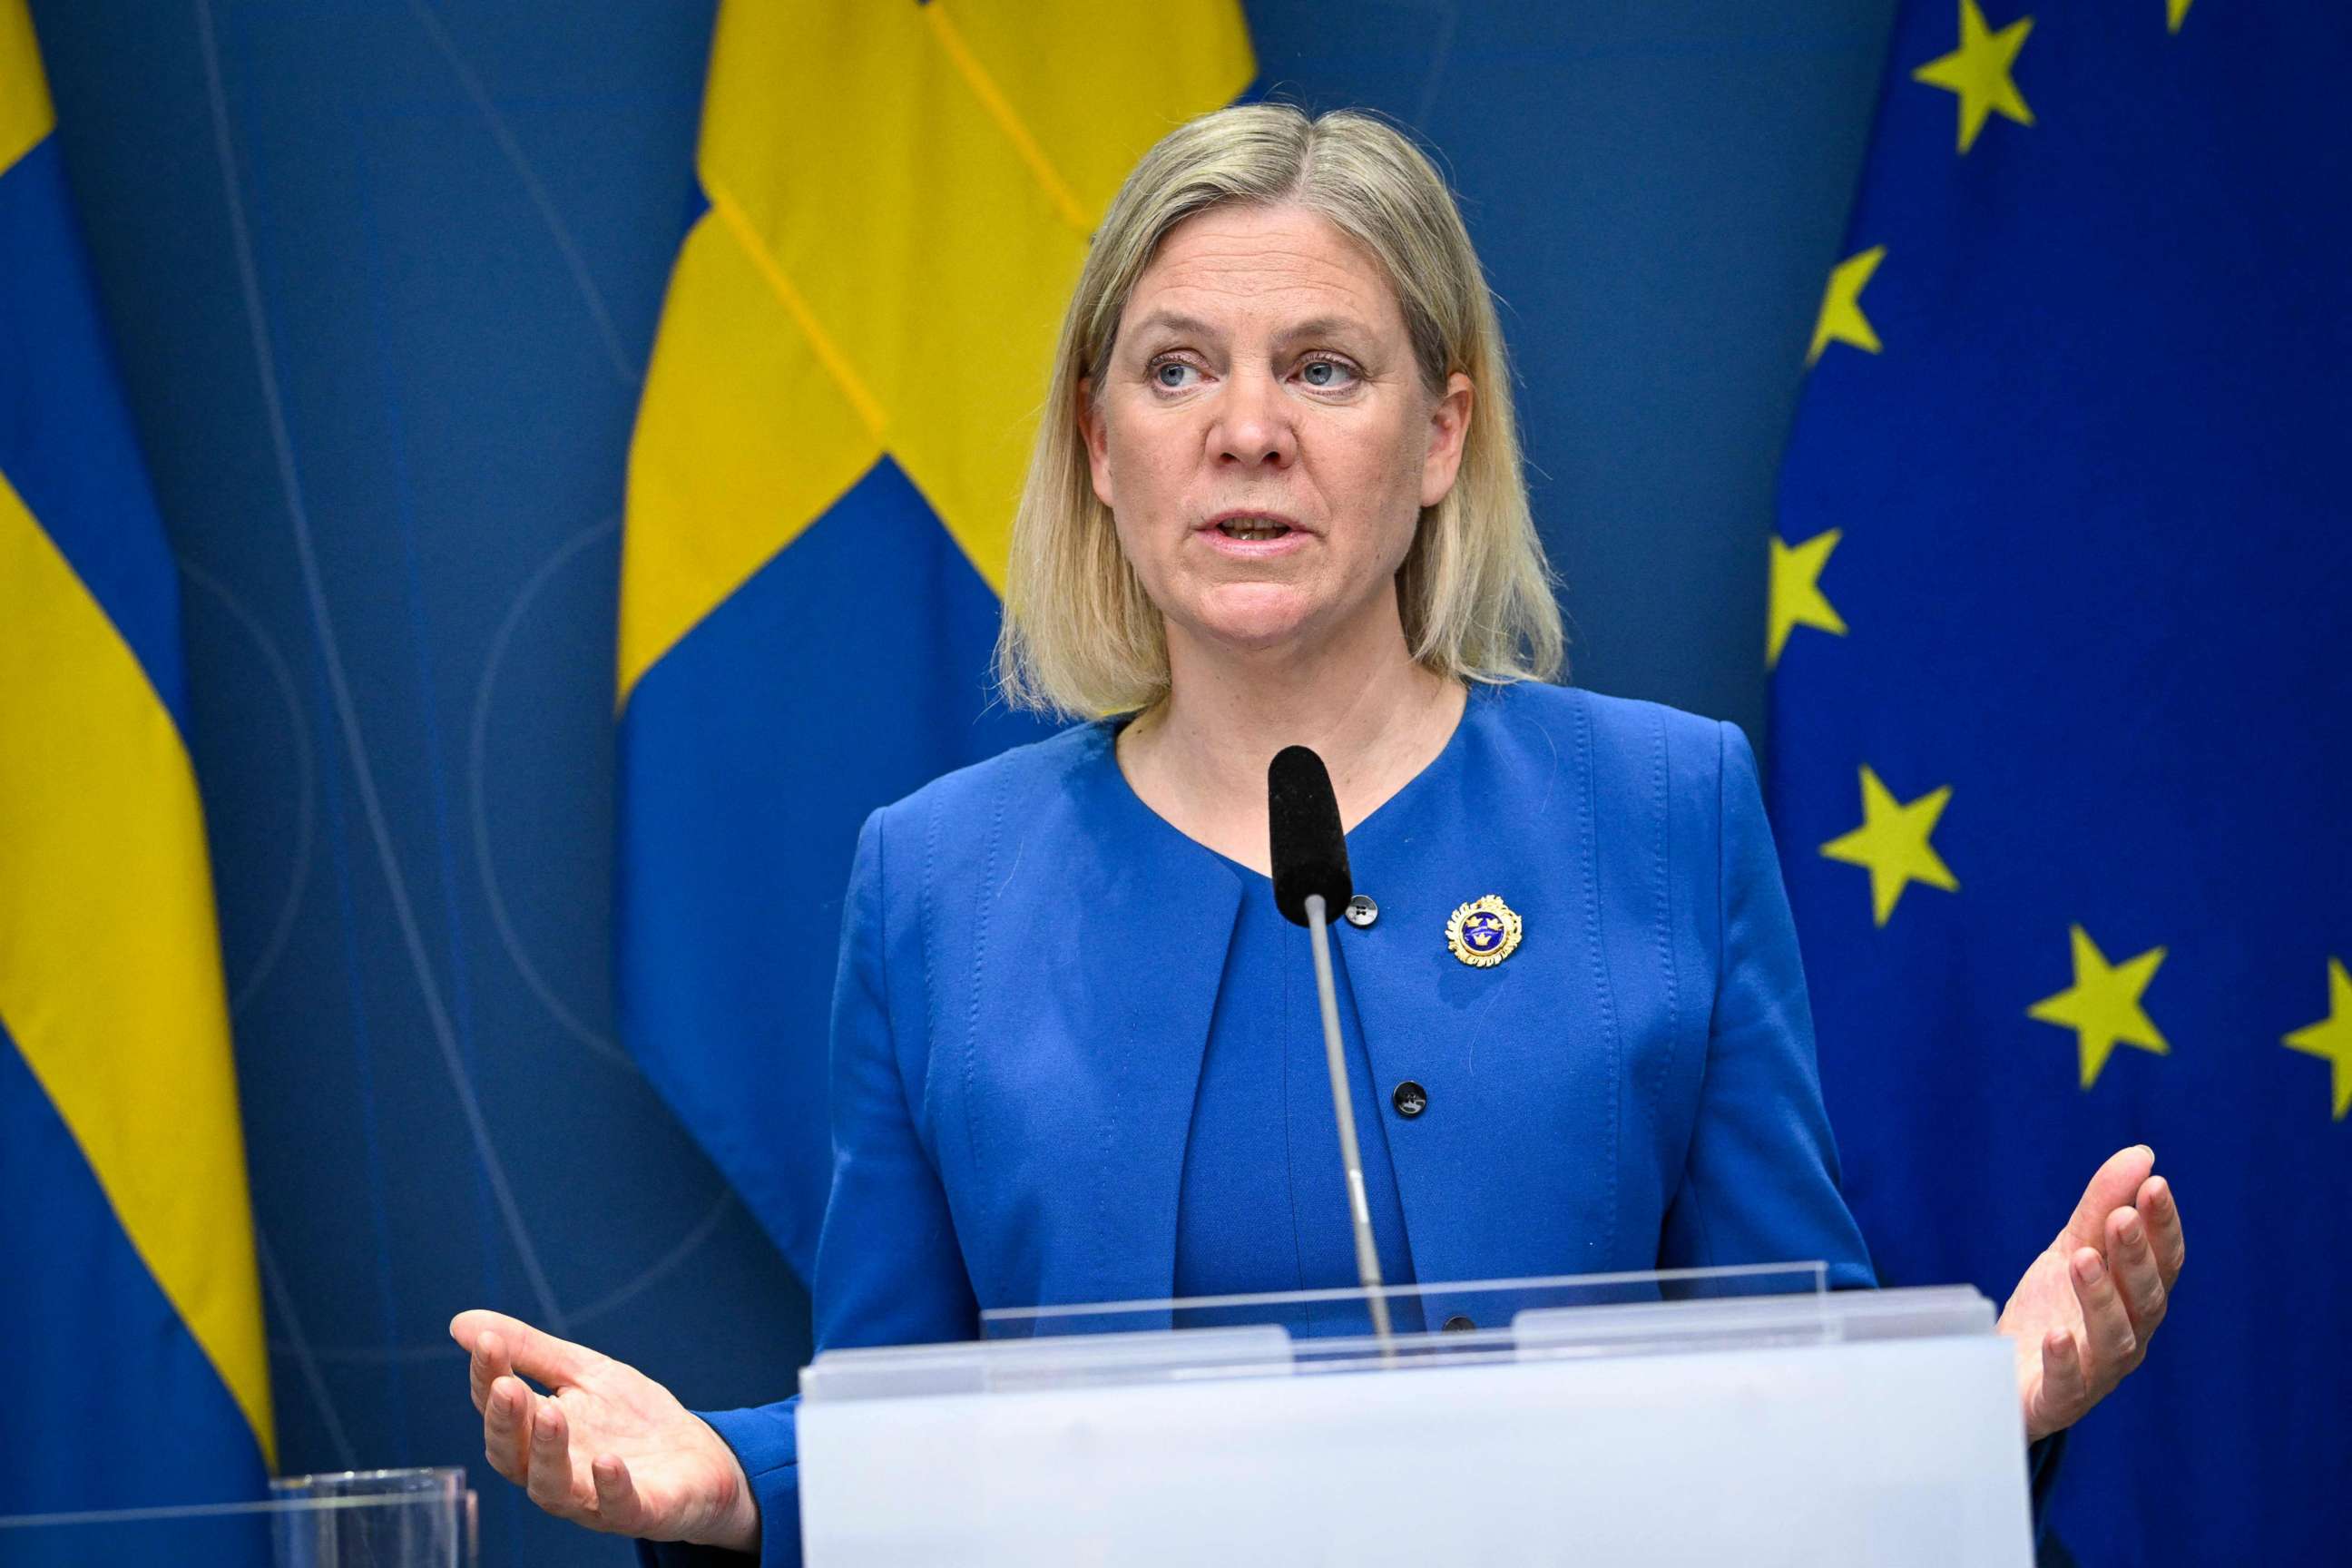 PHOTO: Sweden's Prime Minister Magdalena Andersson gives a news conference in Stockholm, Sweden, on May 16, 2022.